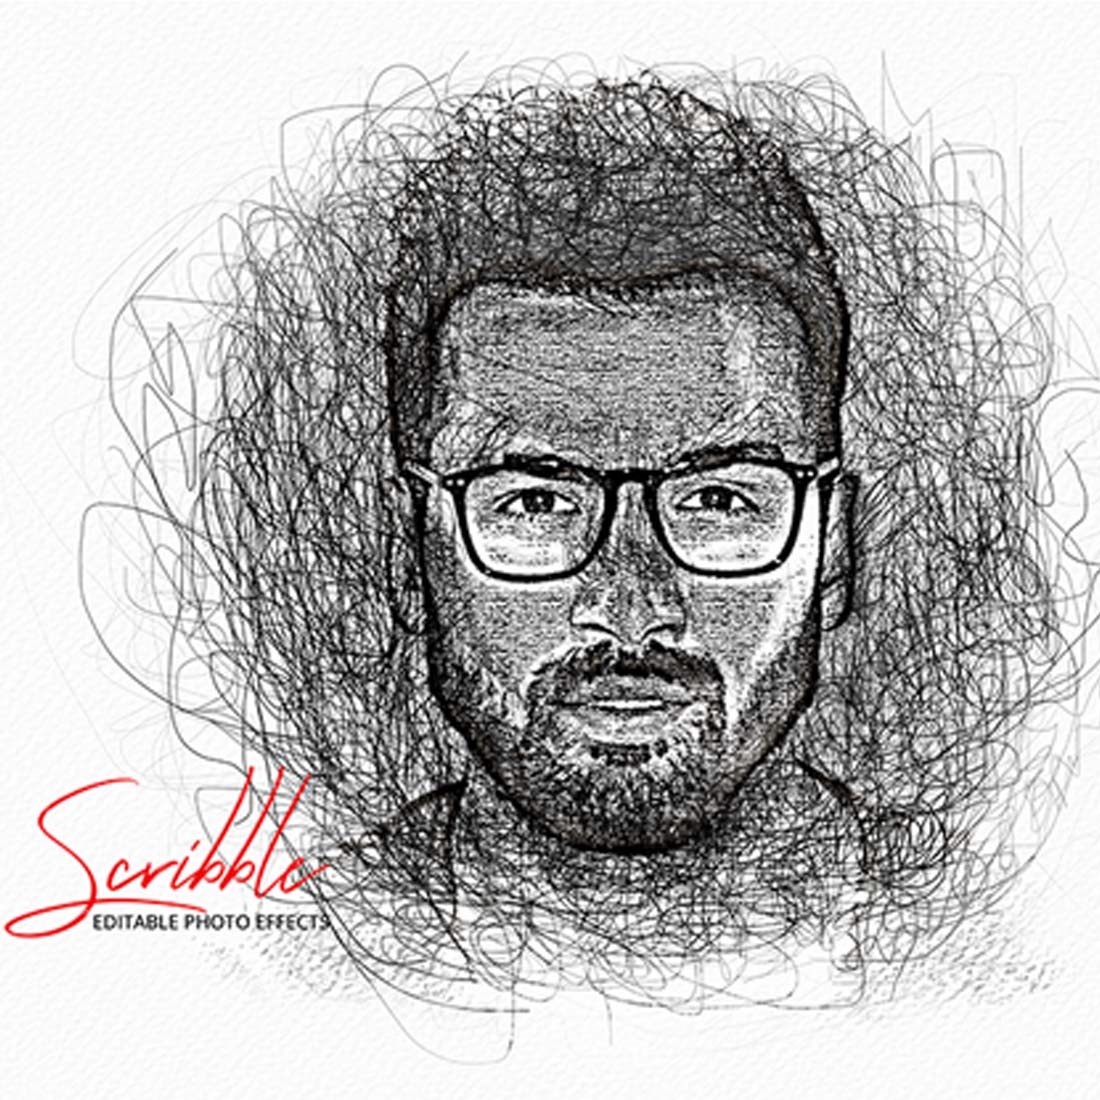 Scribble Art Photo Effect preview image.